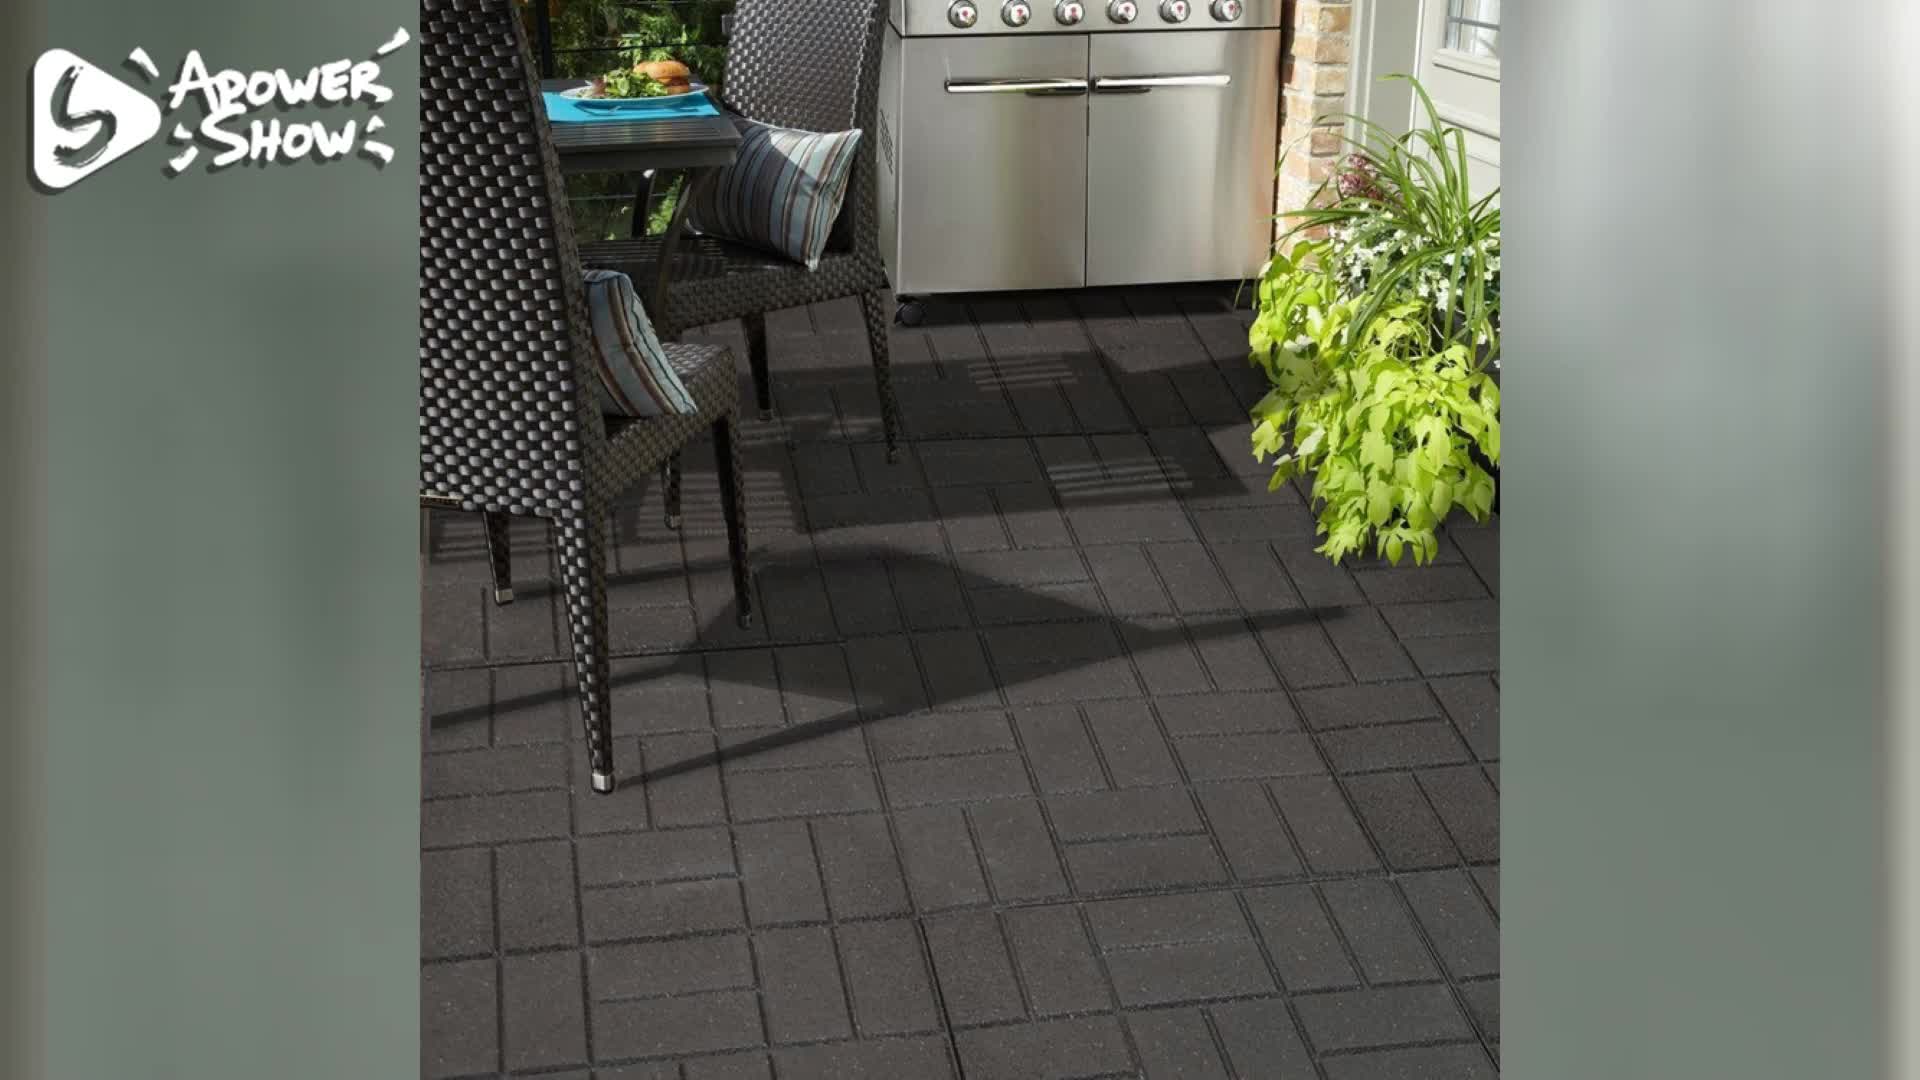 Cheap Flooring Balcony Waterproof Outdoor Flooring Cover Recycled Rubber Deck Tiles Canada Buy Recycled Rubber Deck Tiles Canada Rubber Deck Tiles Lowes Rubberdeck Supertile Product On Alibaba Com